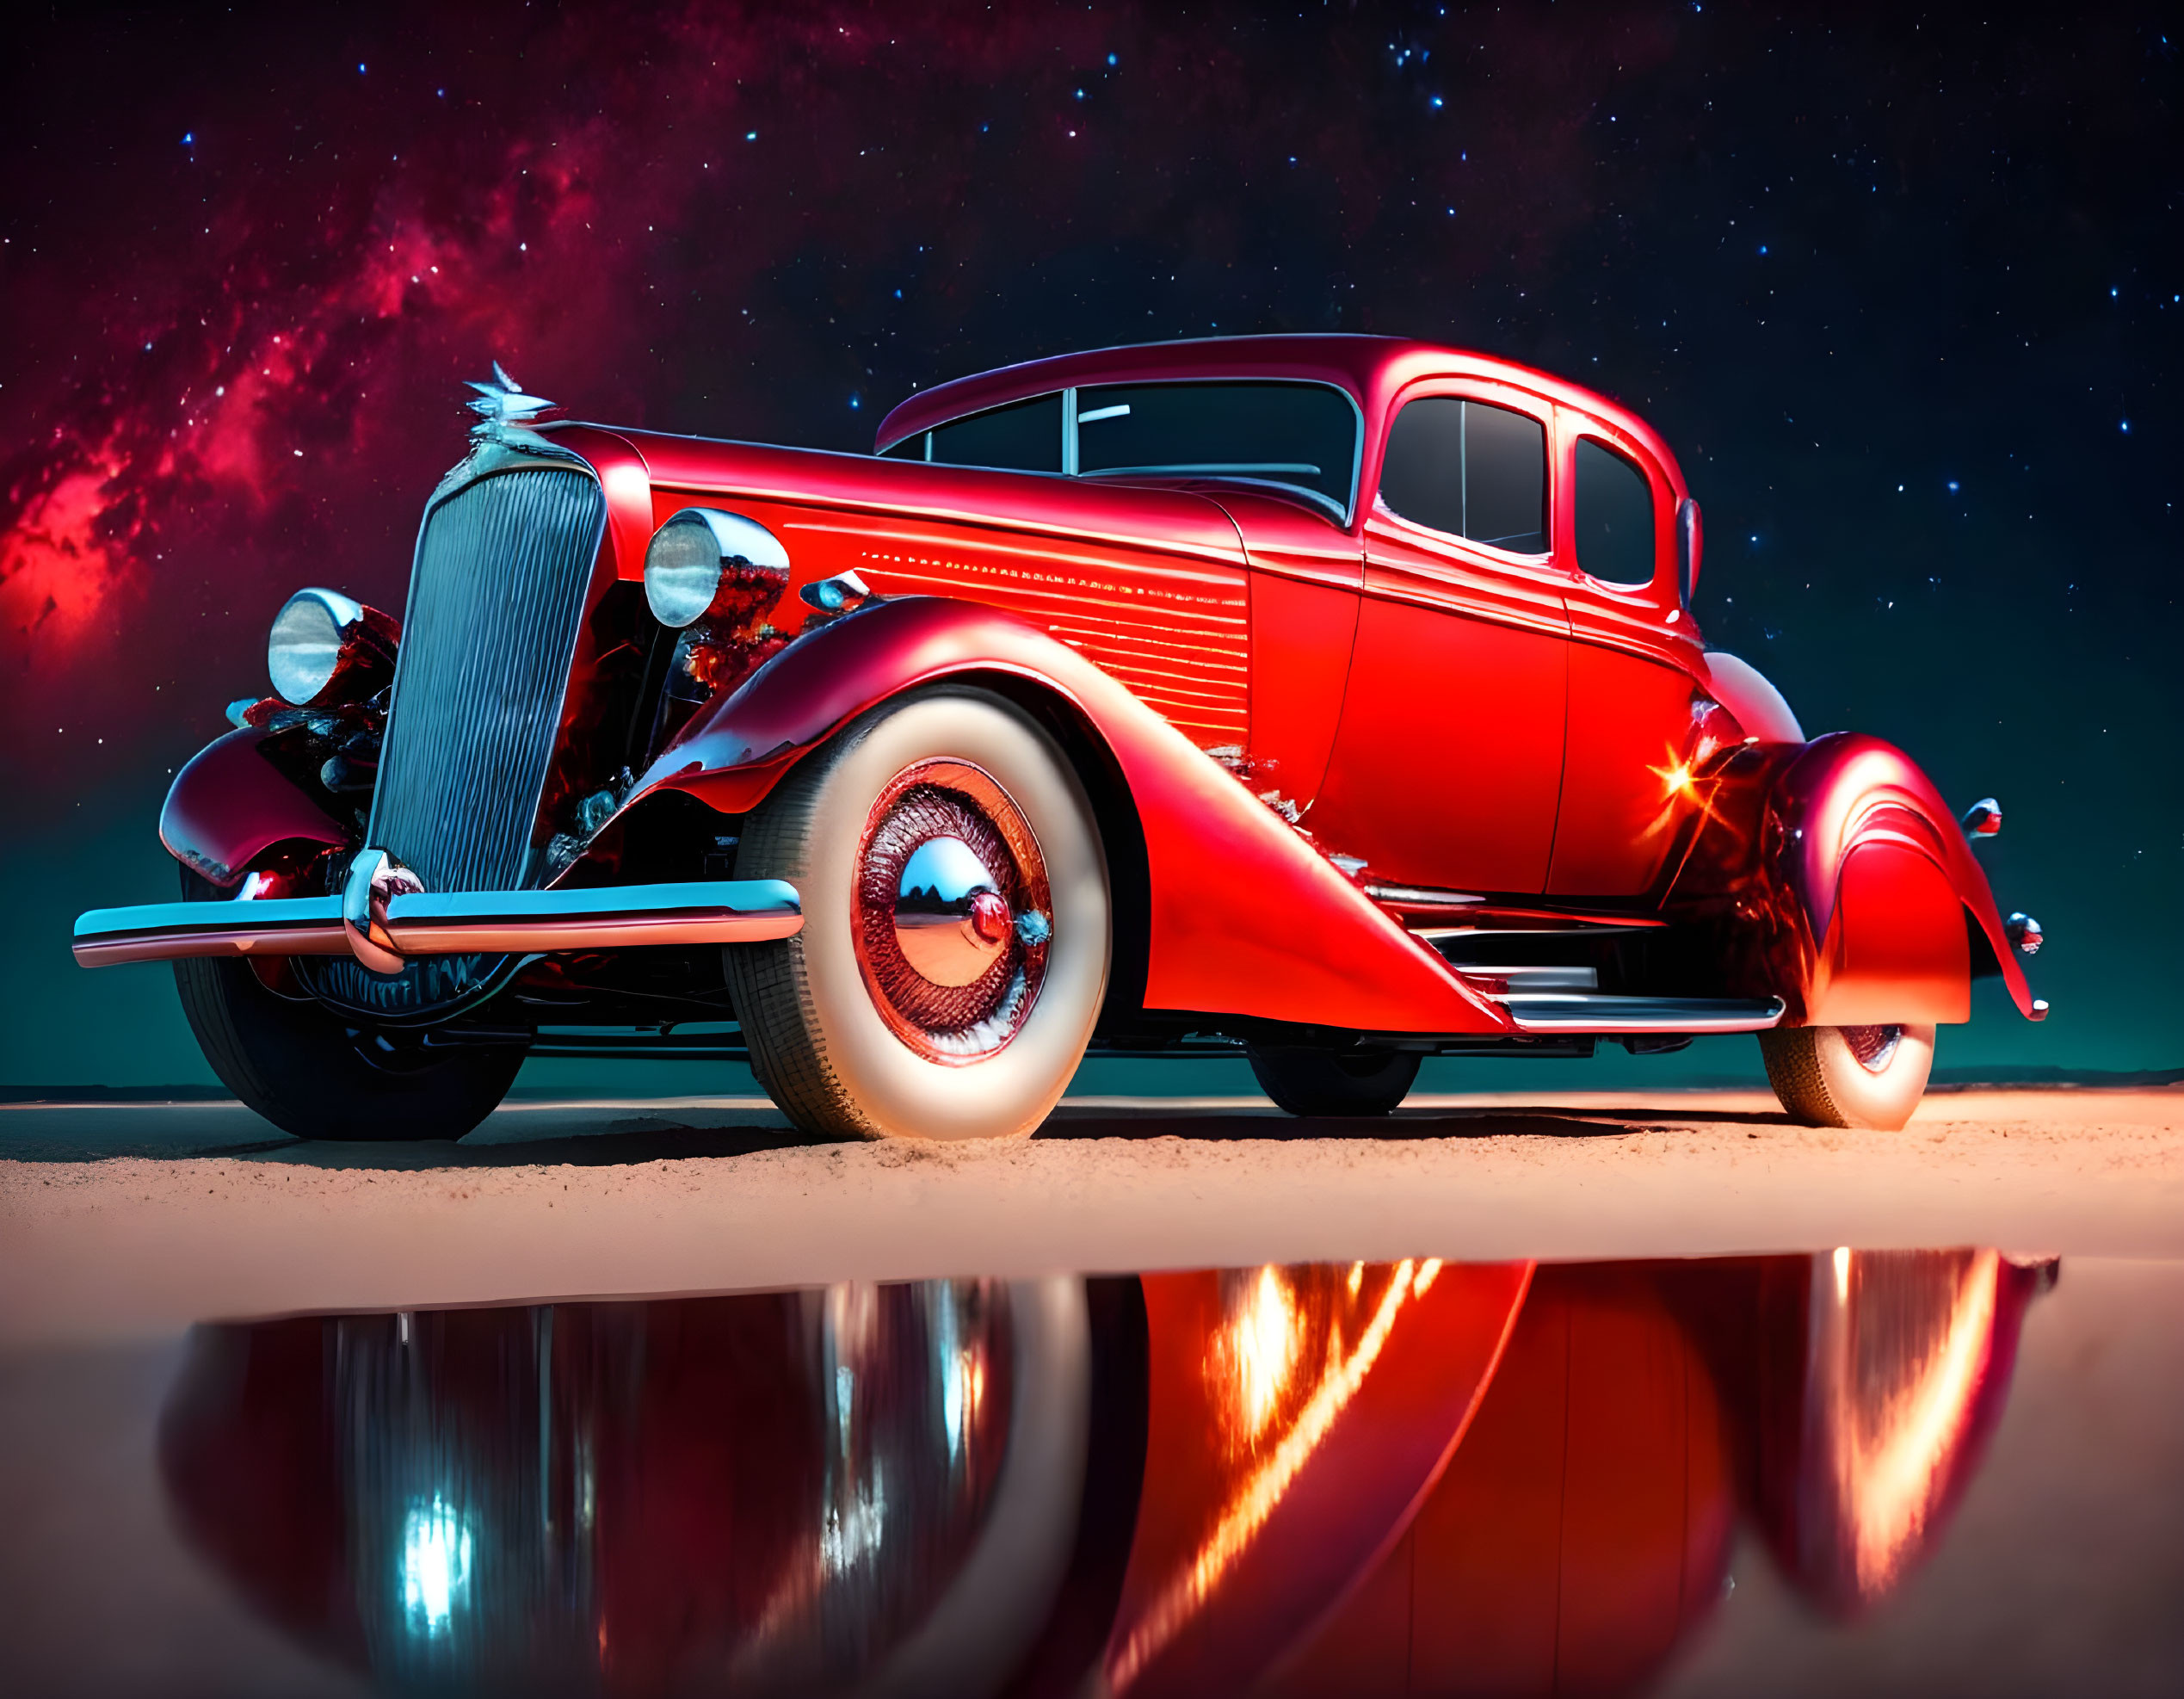 Classic Red Car Parked Under Starry Night Sky with Chrome Details